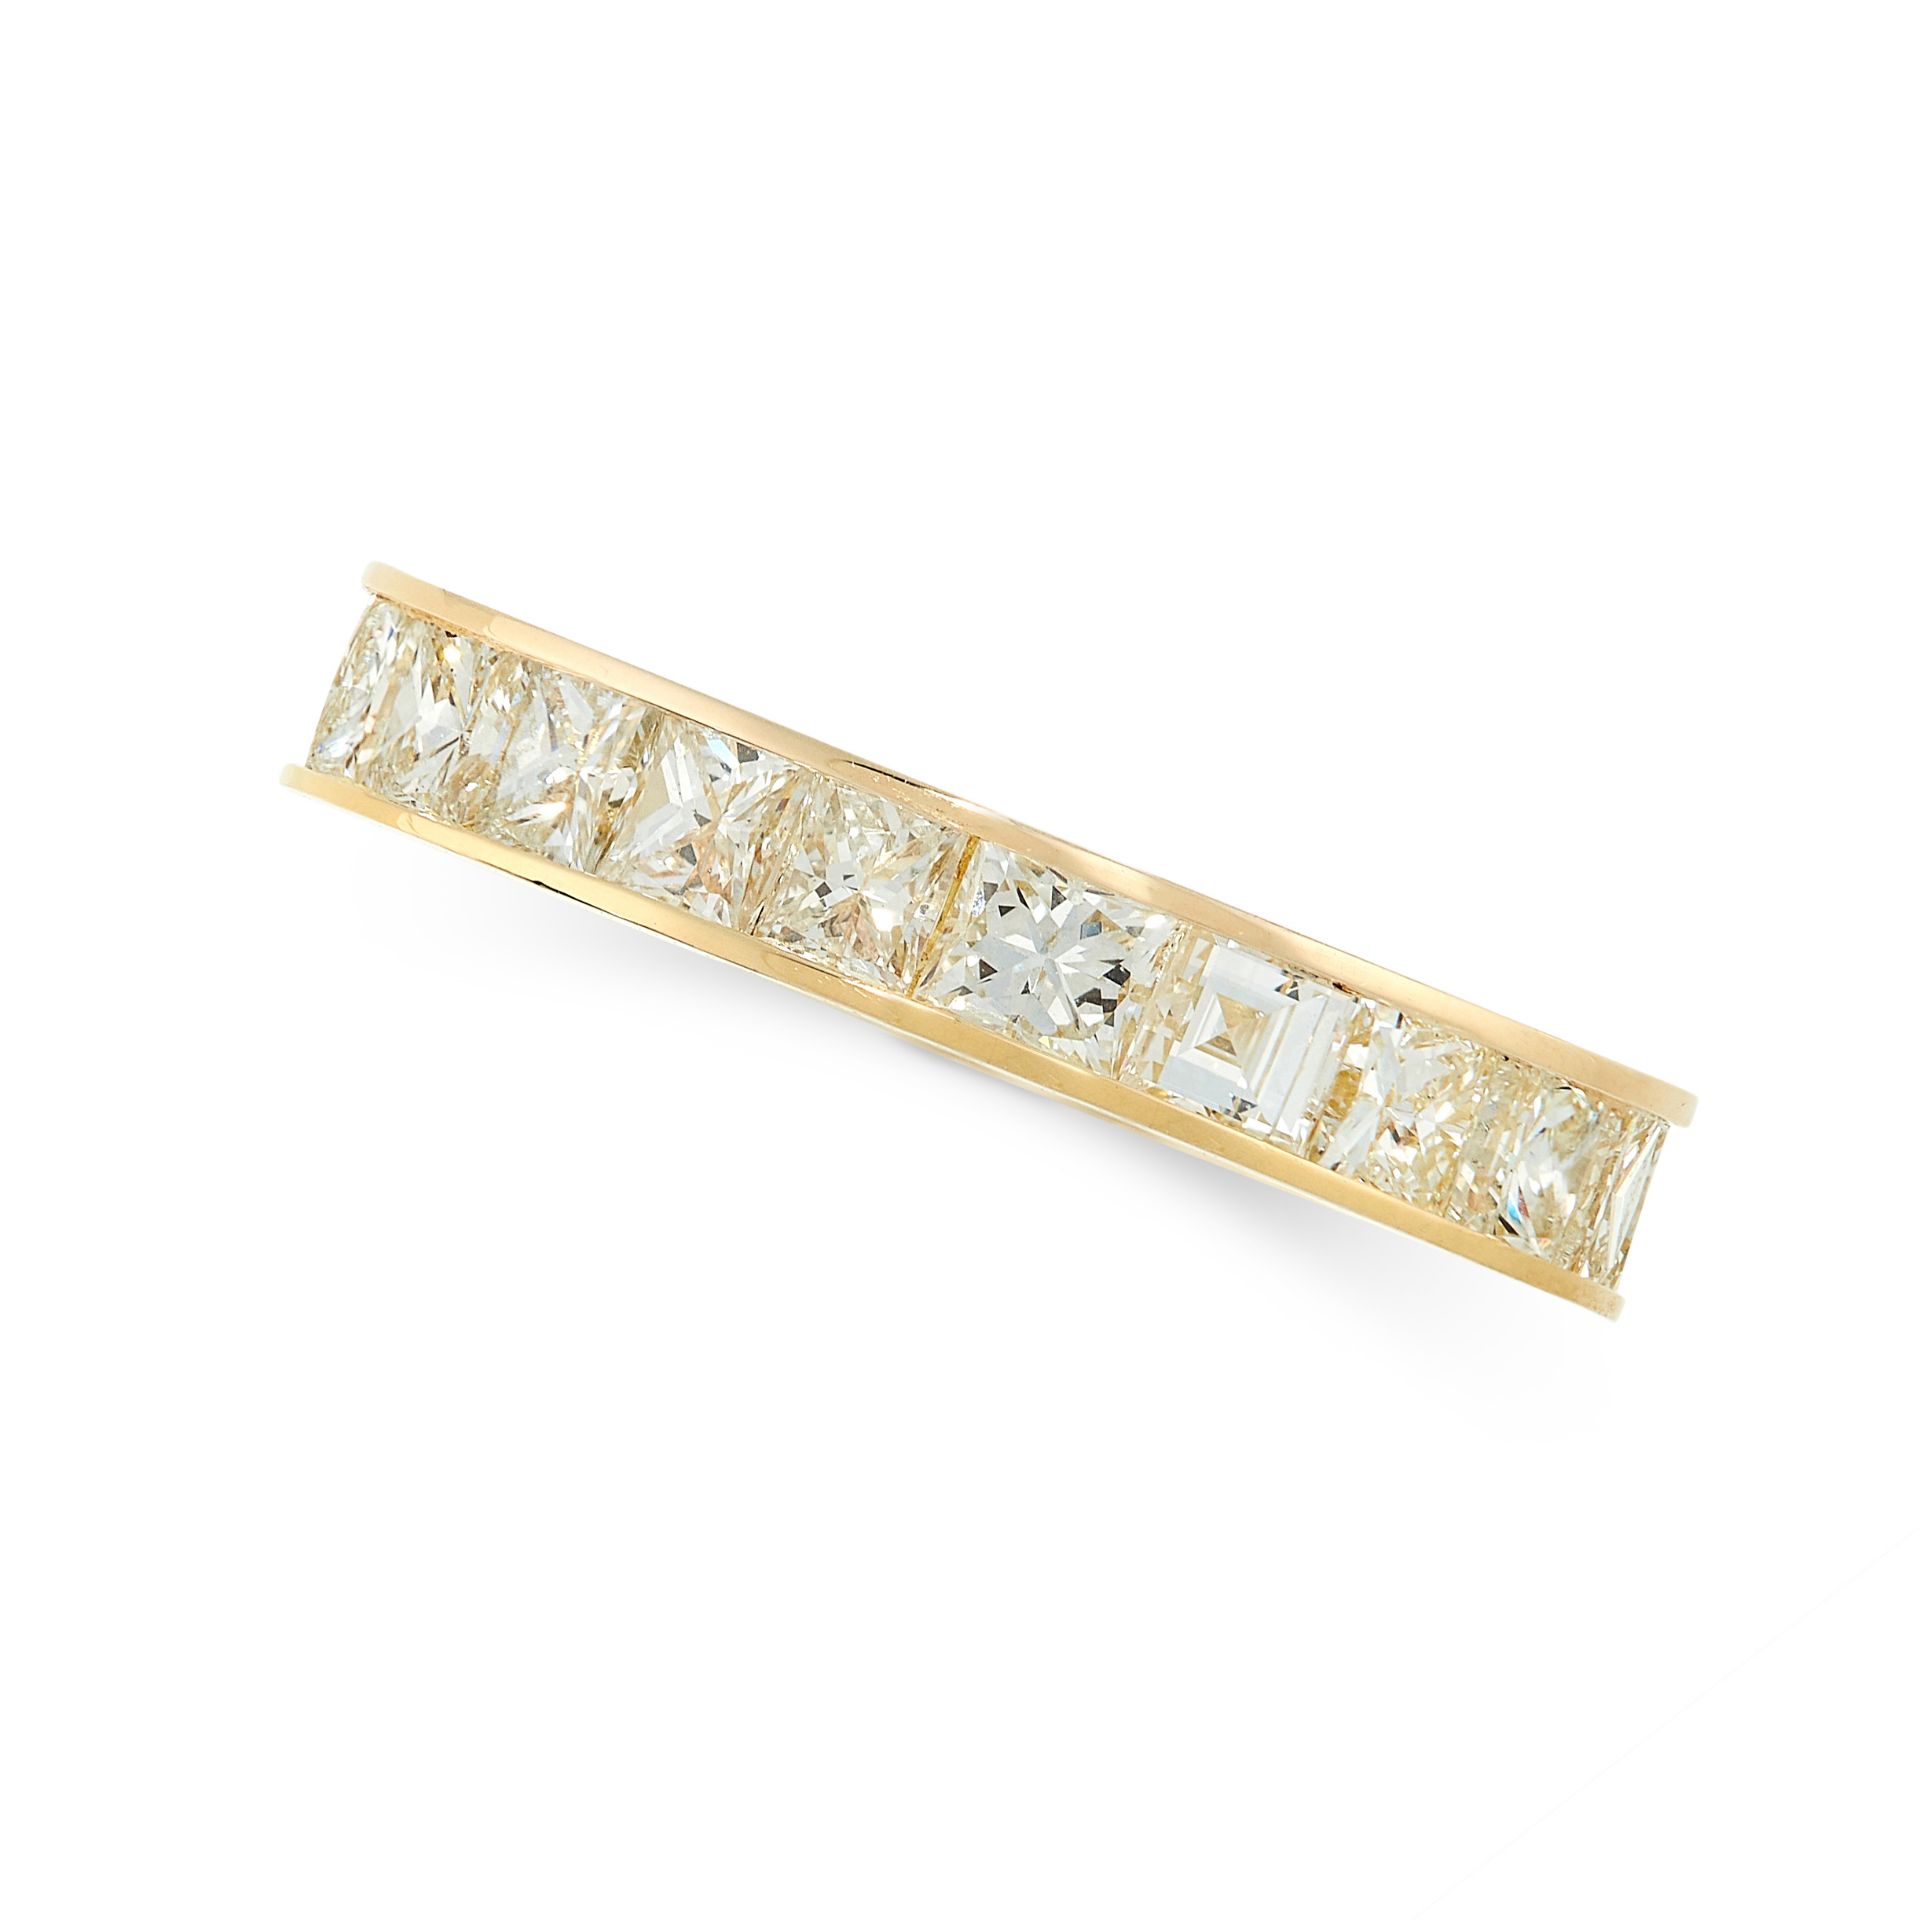 A DIAMOND ETERNITY RING in yellow gold, the band set all around with a single row of princess cut